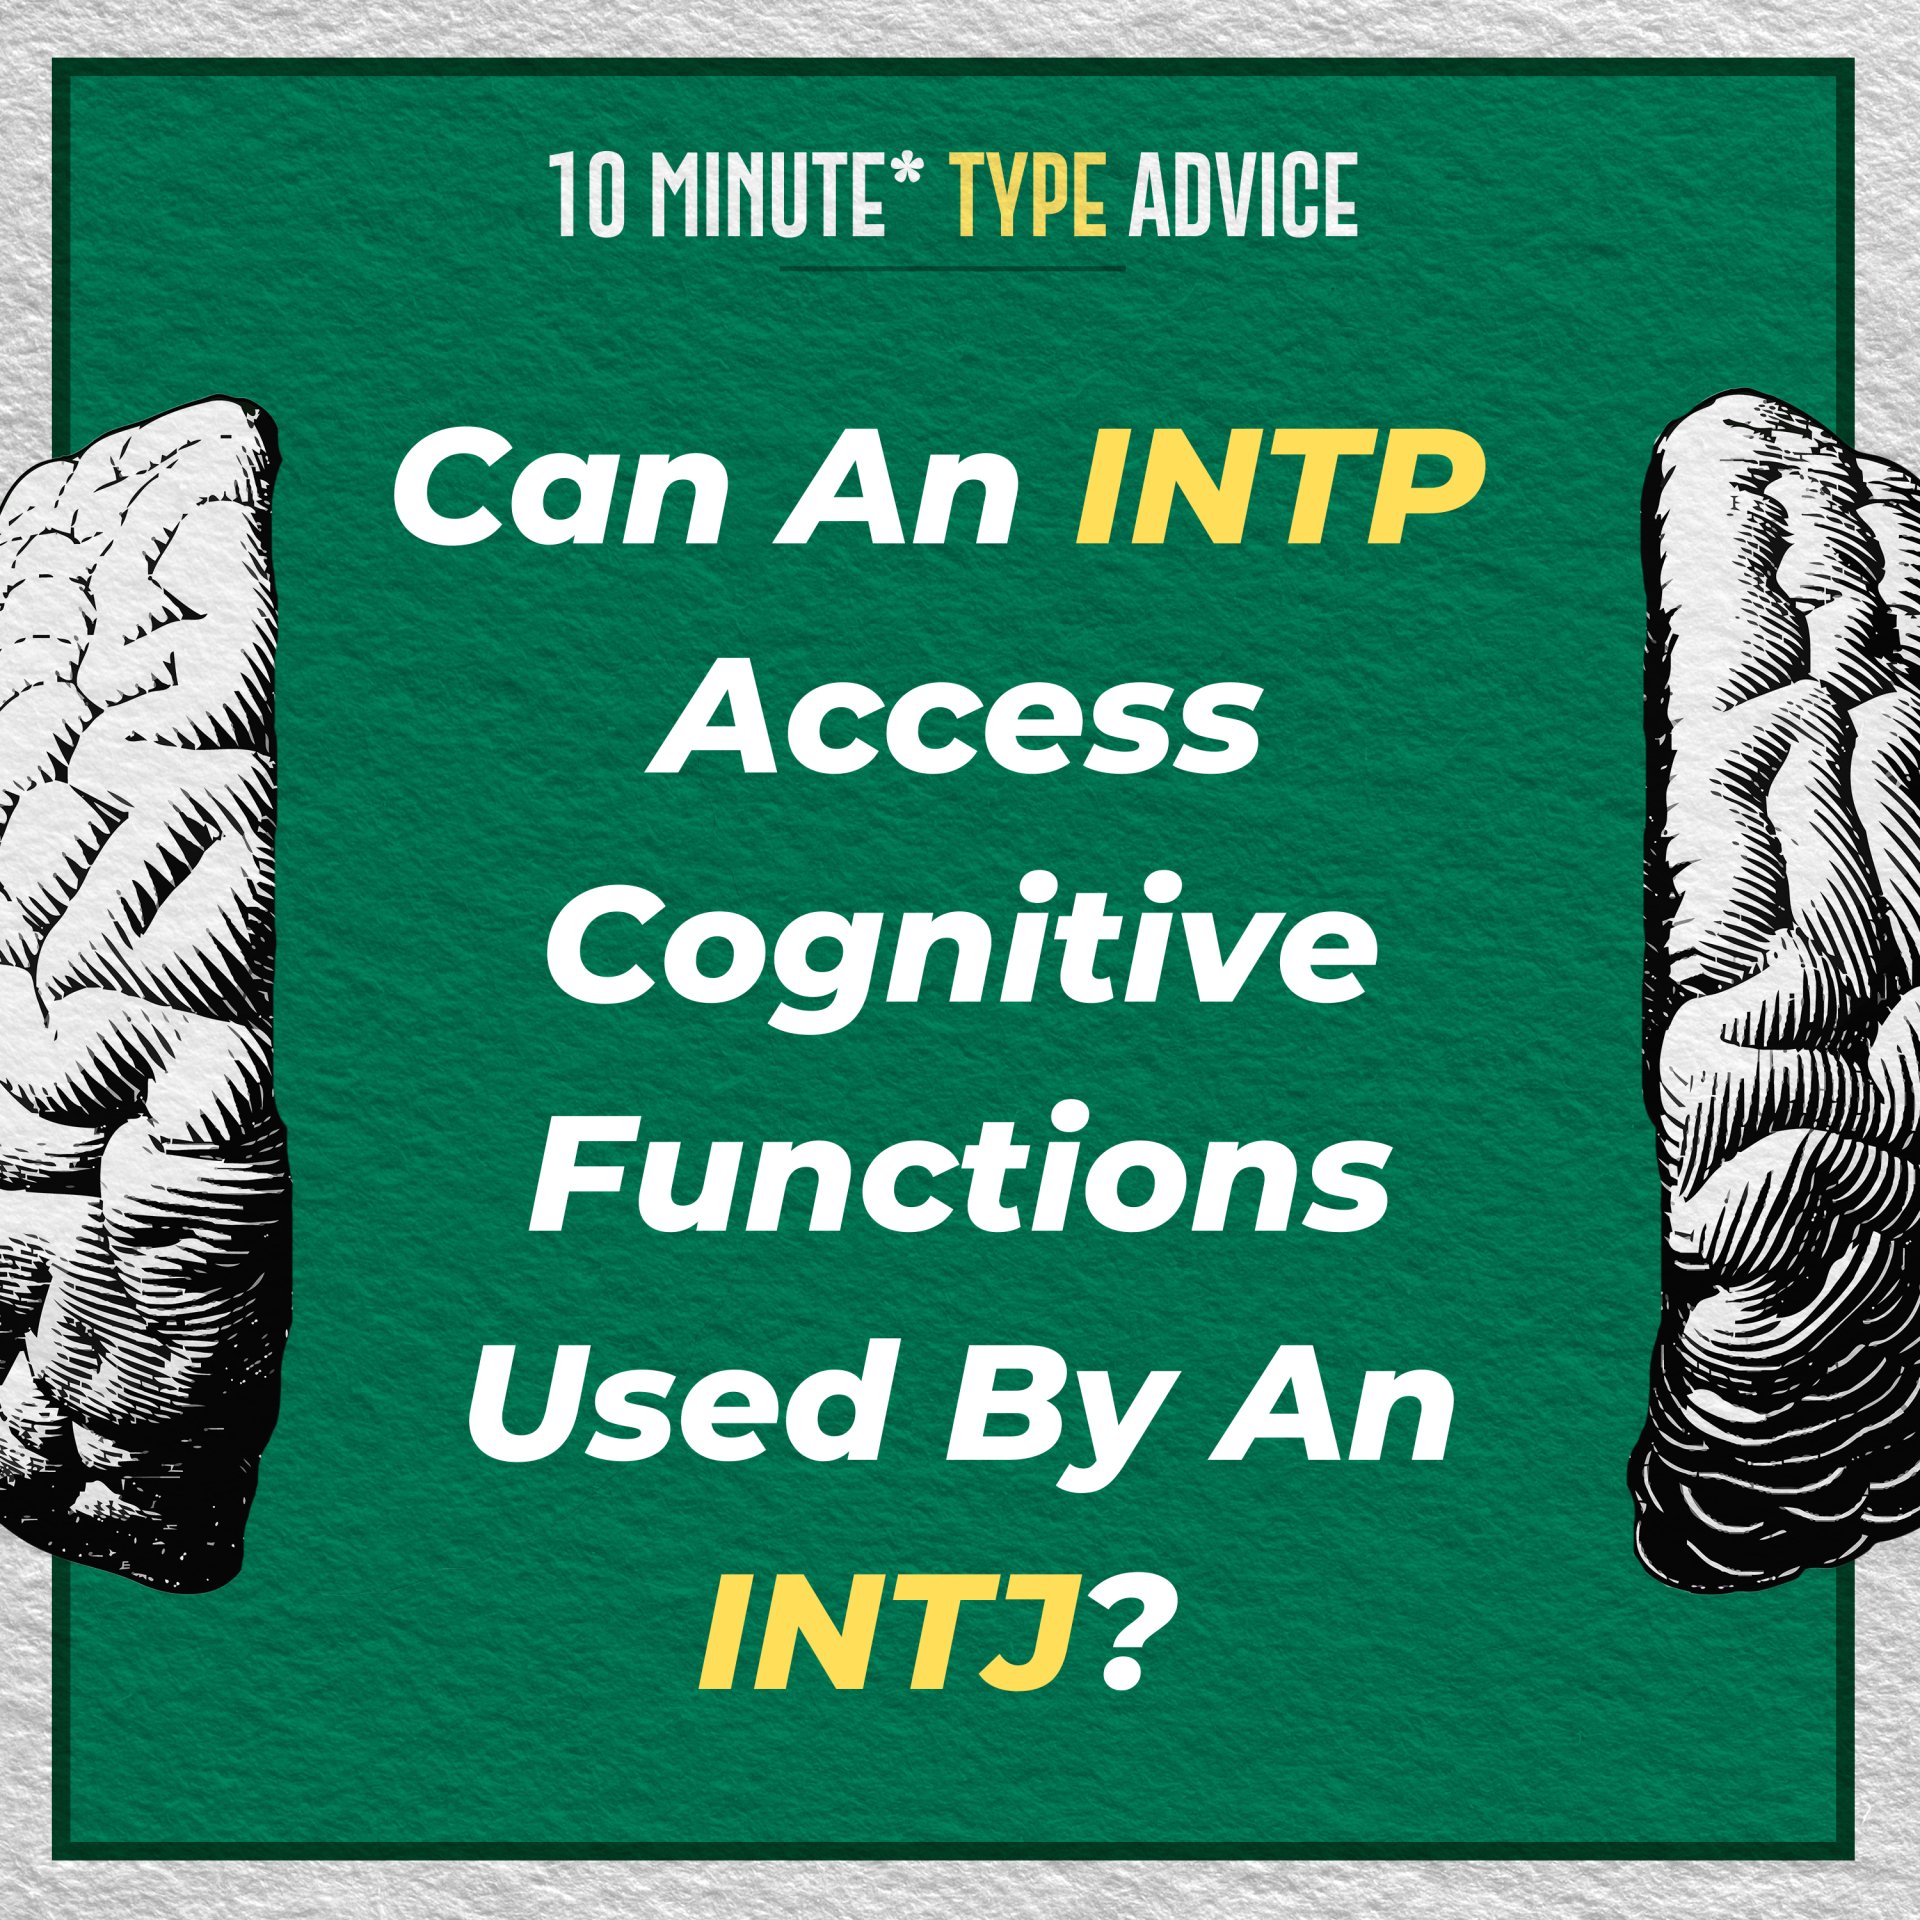 Can An Intp Access Cognitive Functions Used By An Intj 10 Min Type Advice S02 E01 Personality Type And Personal Growth Personality Hacker